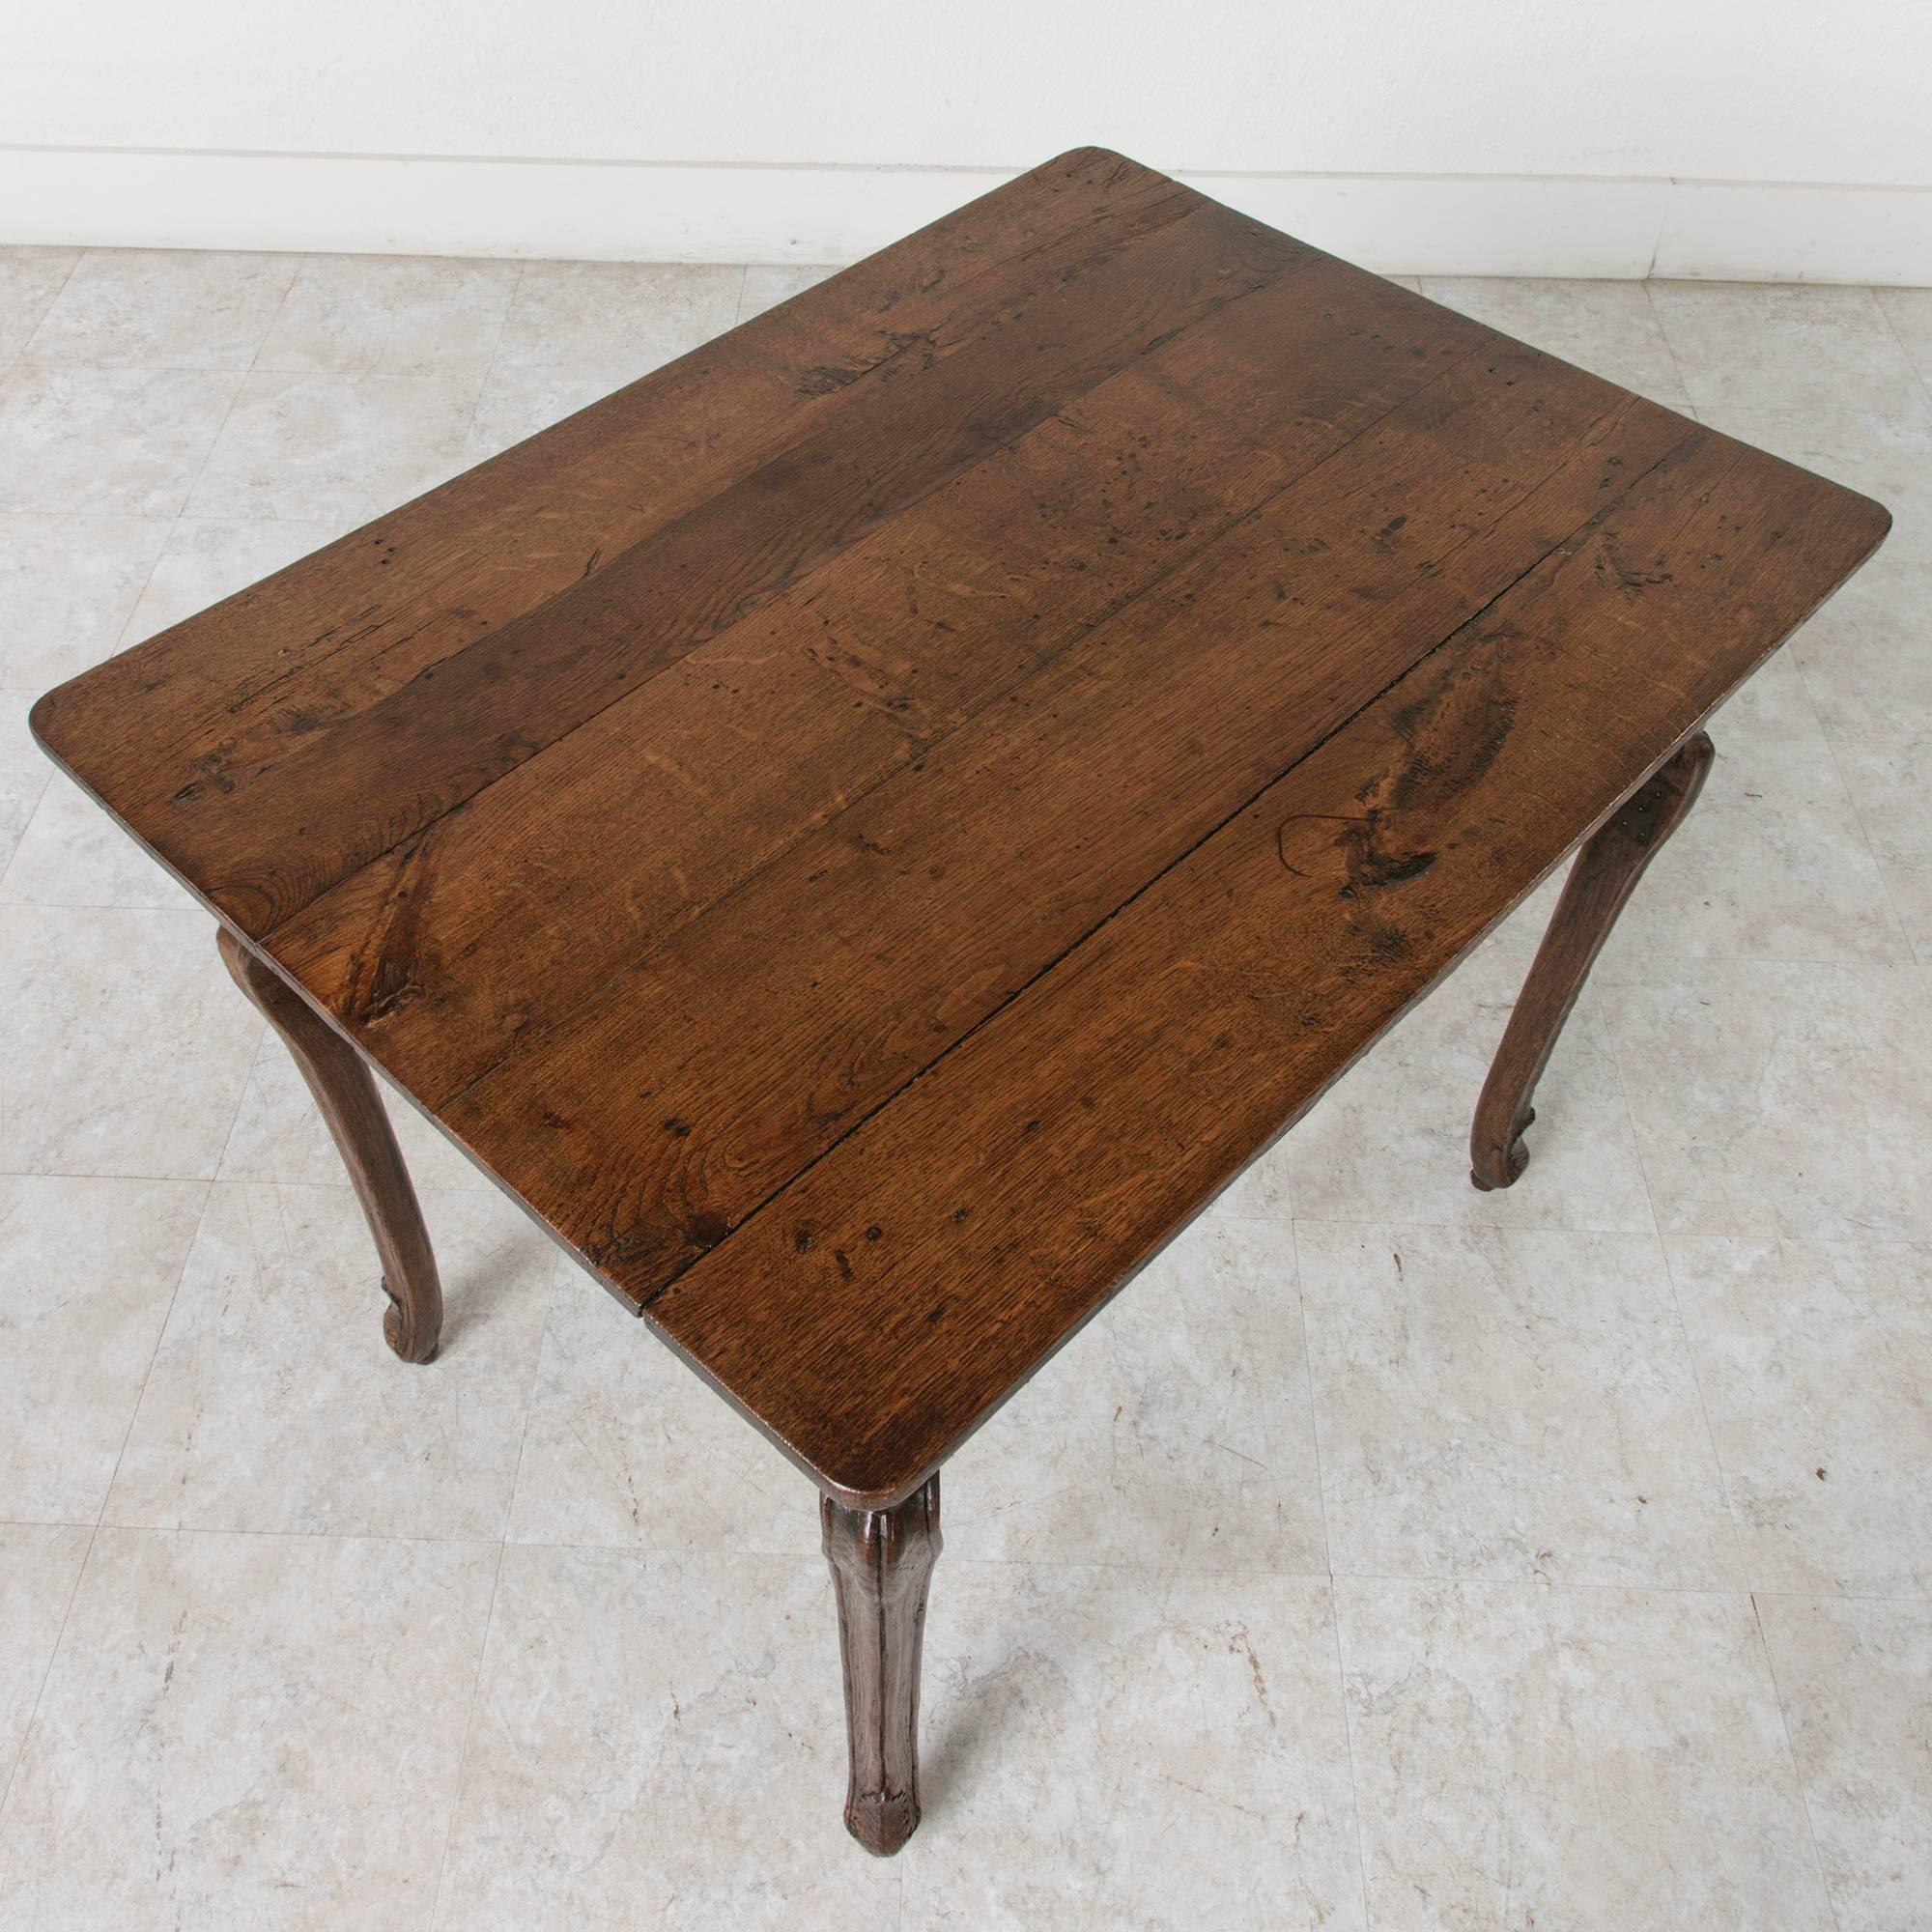 Made of oak, this period Louis XV side table has stood the test of time with its Classic design. Charming and understated, this table features a slight curvature to the leg and rosettes carved into the apron. This rustic, elegant table displays a